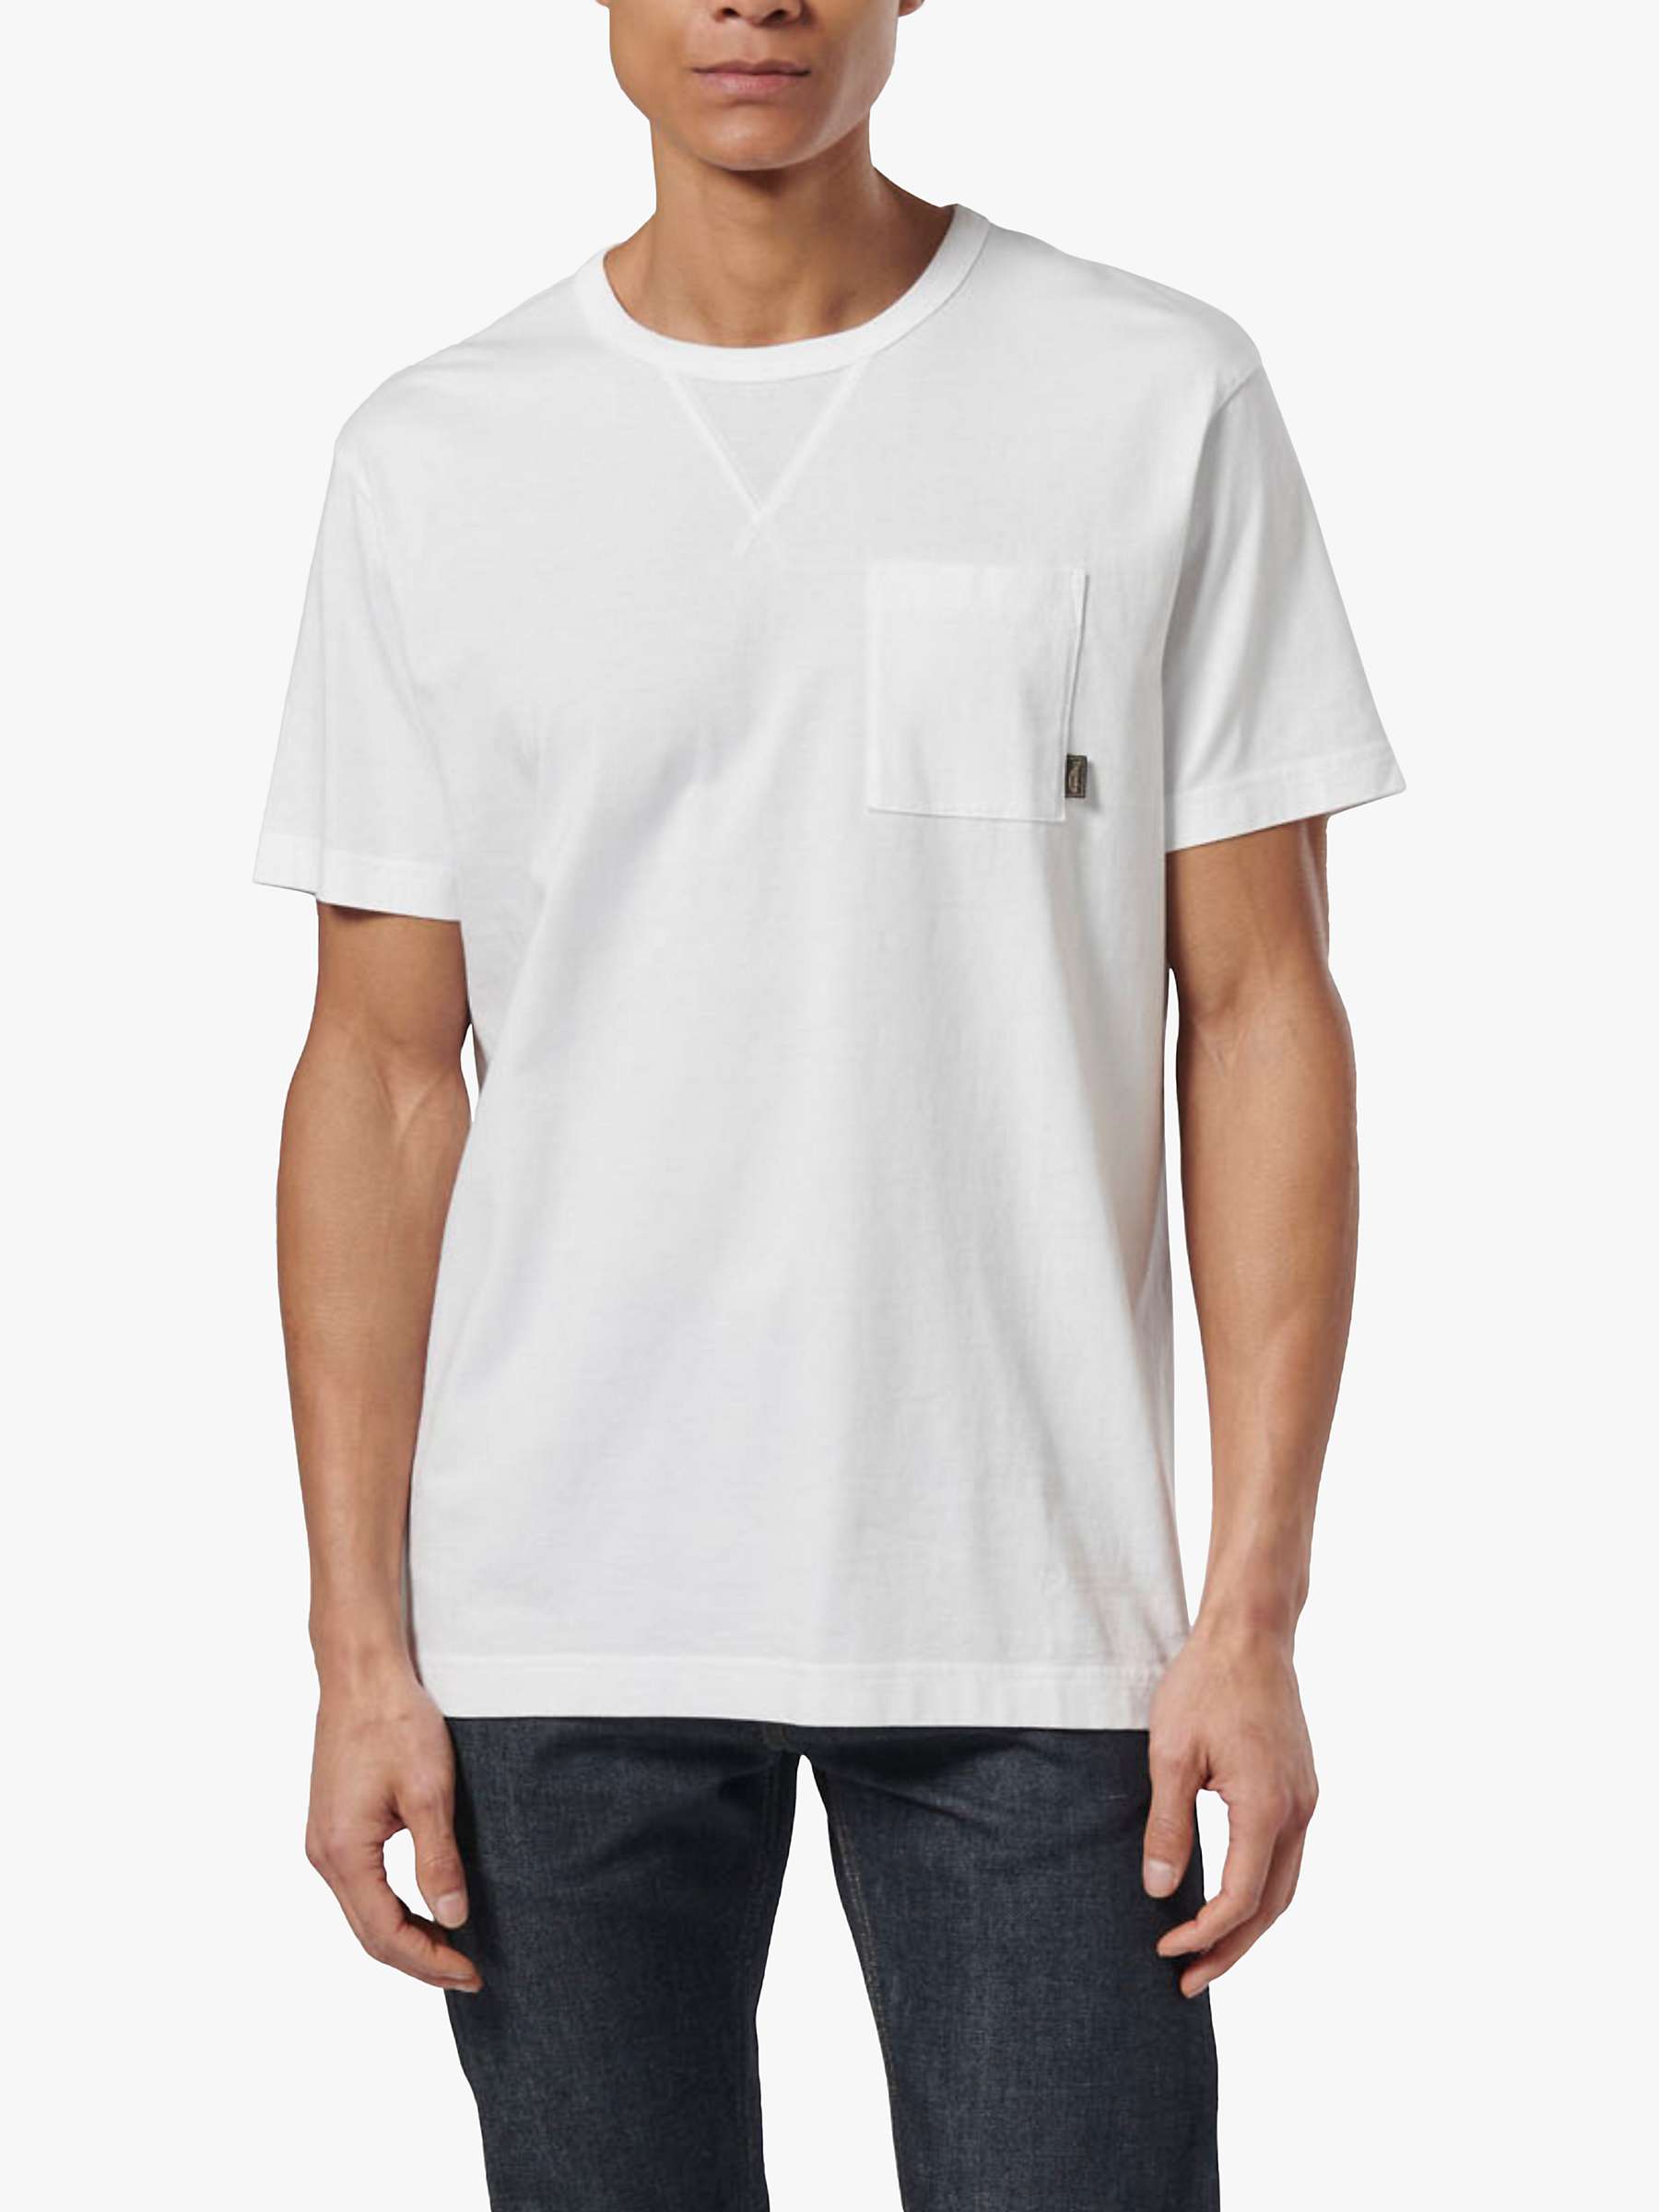 Buy Triumph Motorcycles Sled Print T-Shirt, White Online at johnlewis.com